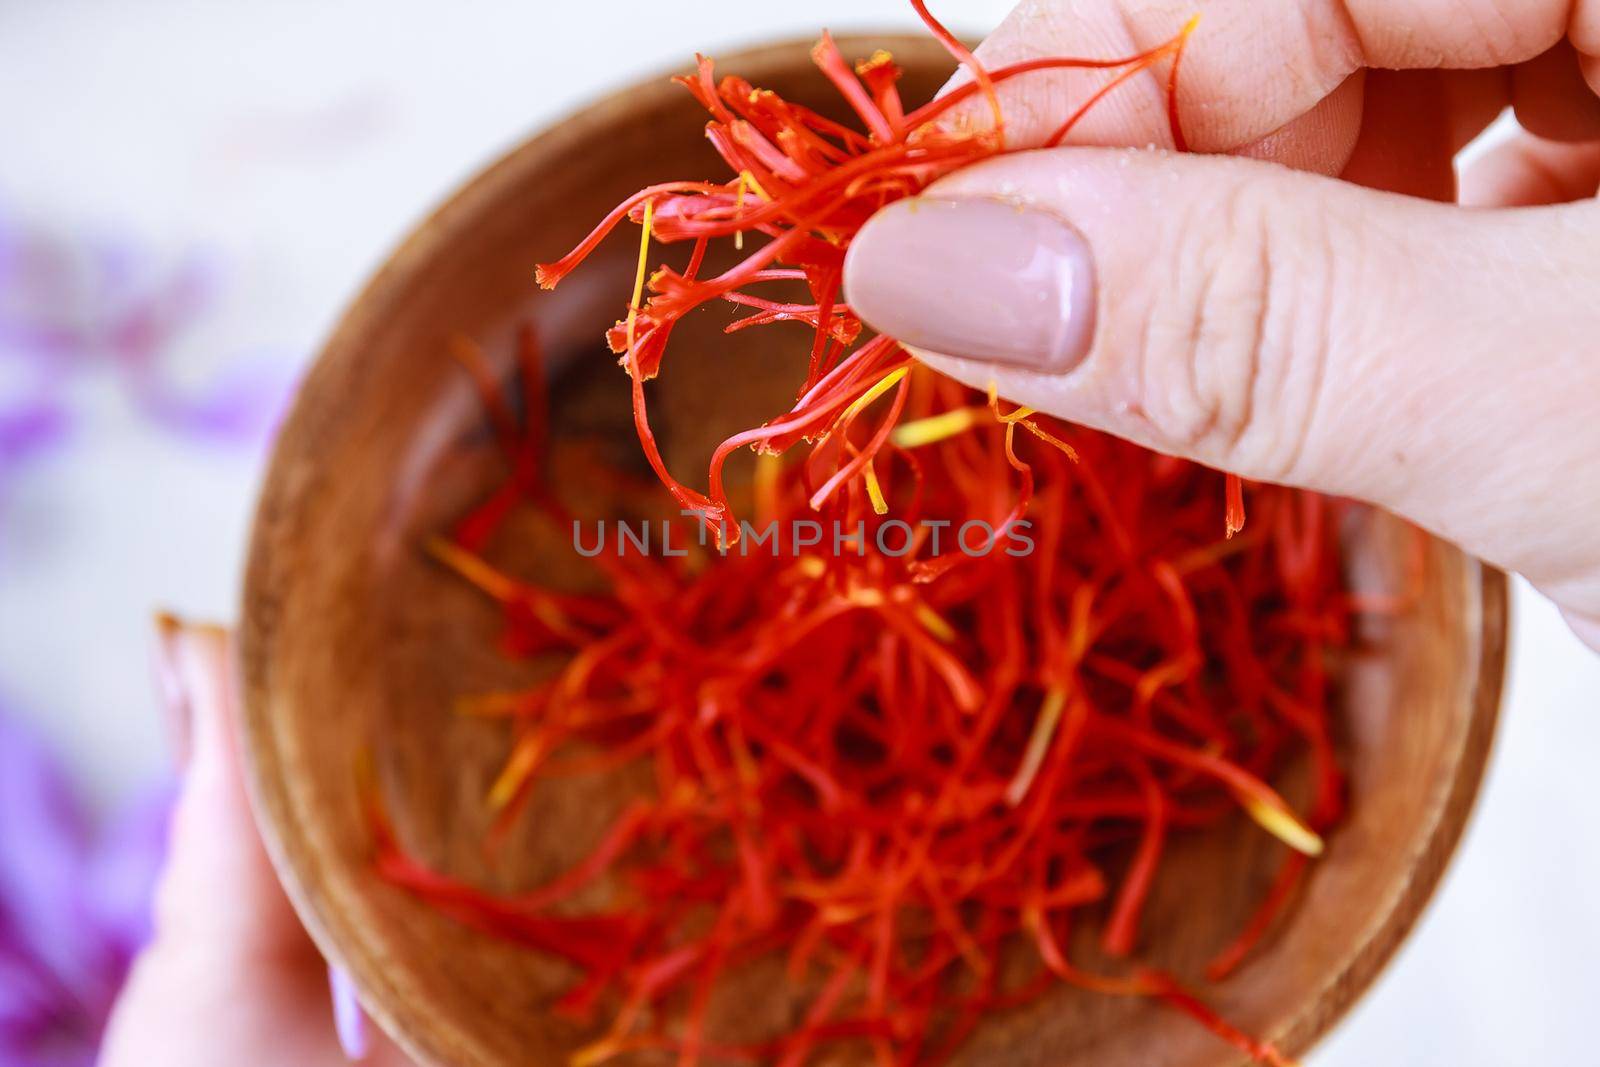 The girl takes the saffron from a wooden plate. Fresh saffron stamens. Separation of saffron threads from the rest of the flower.